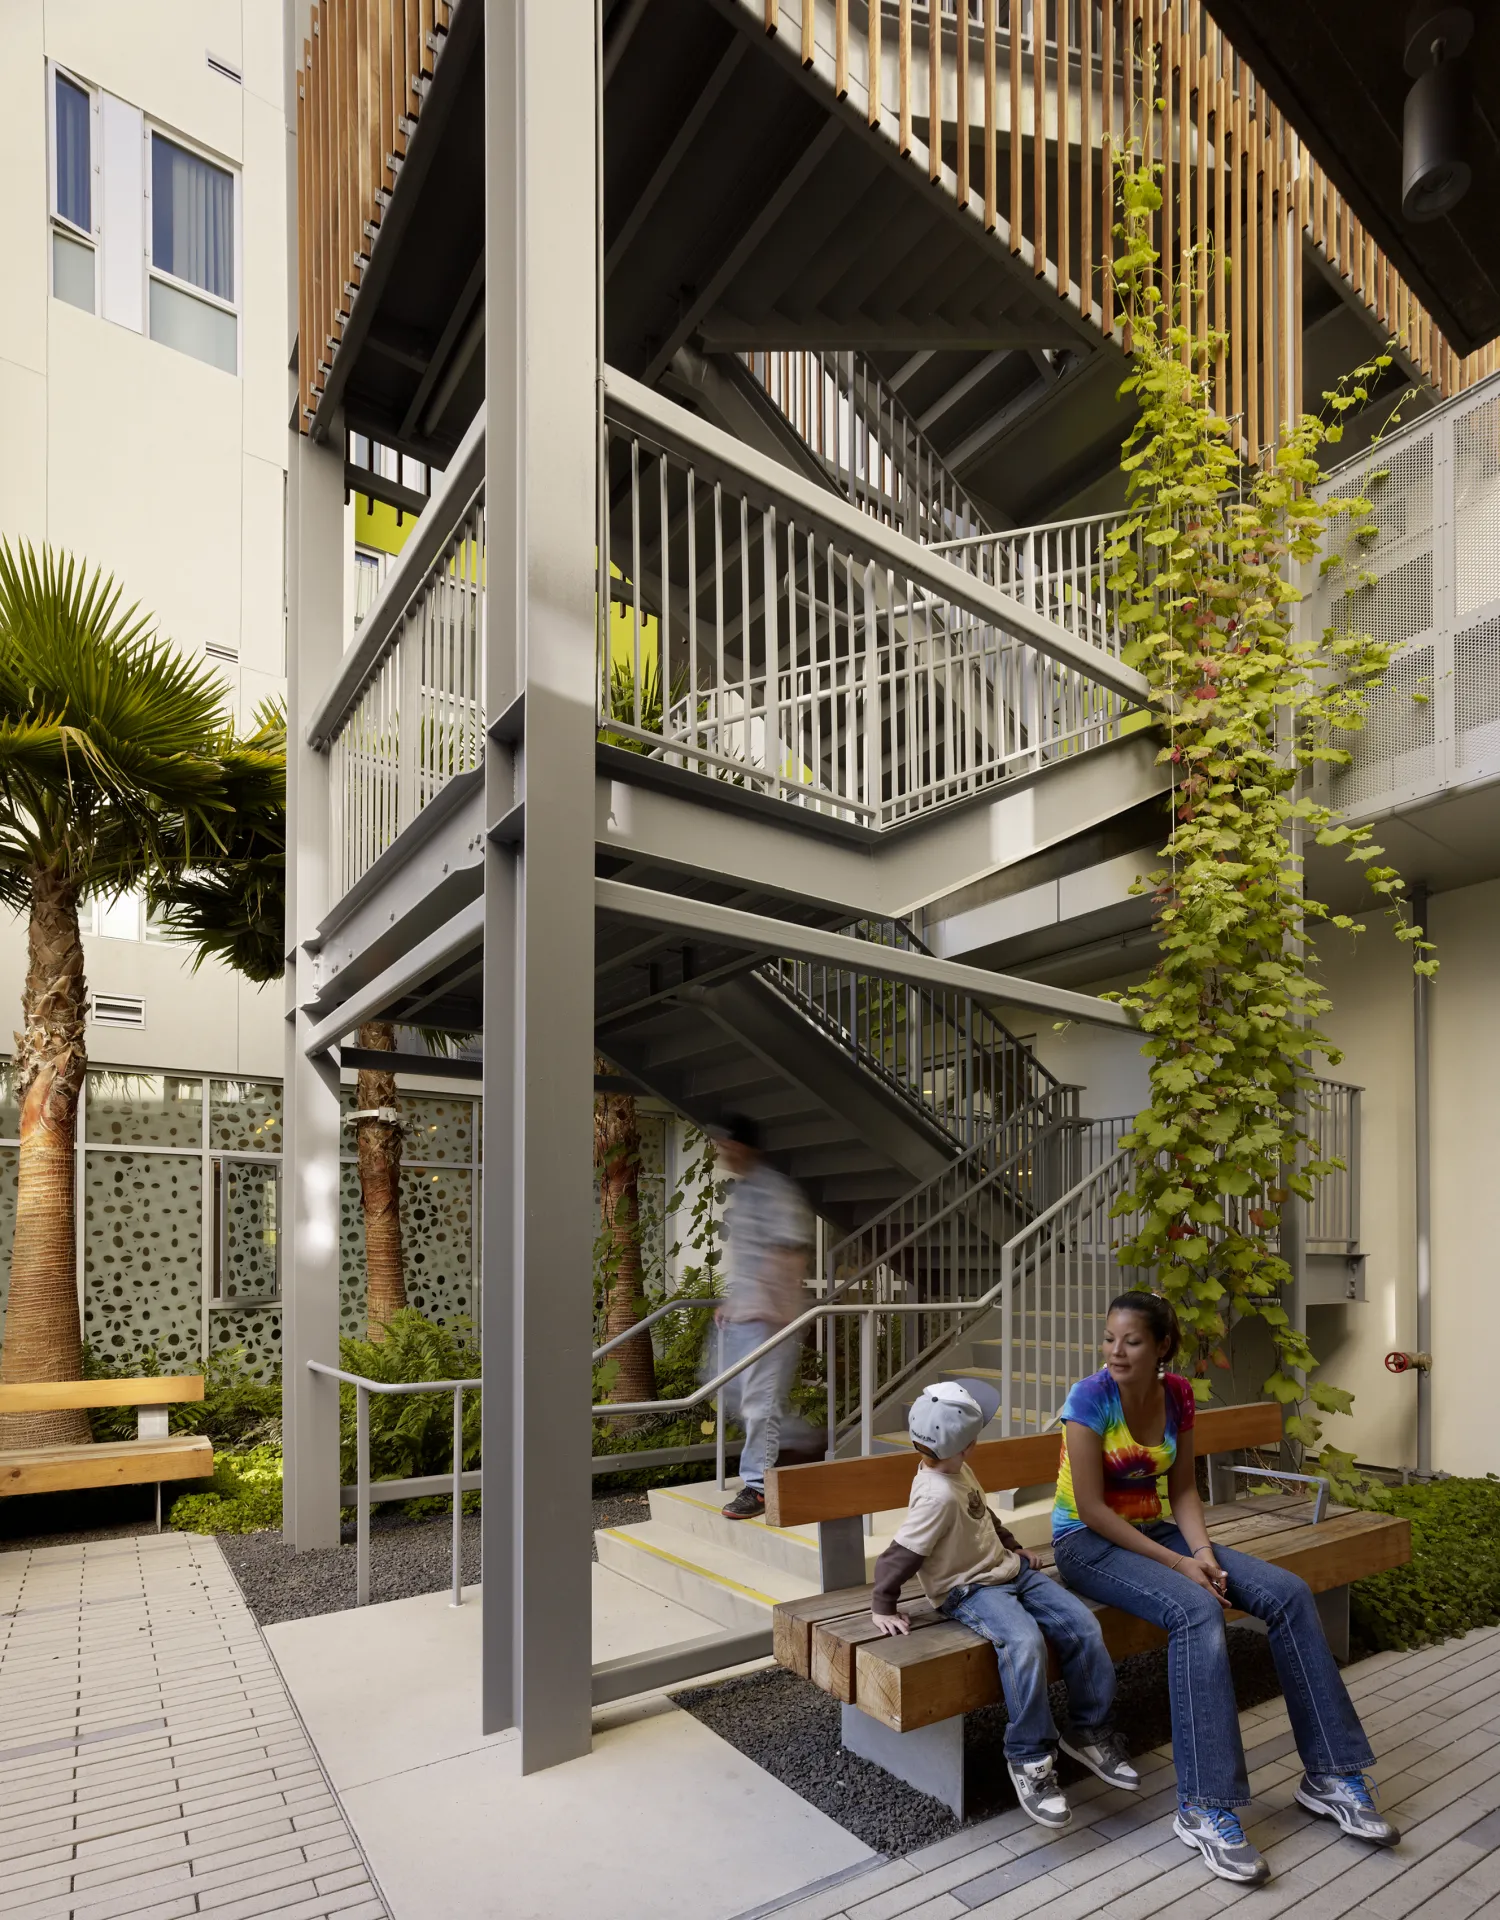 Adult and child sitting on a bench in the courtyard near the open-air stair tower at Richardson Apartments in San Francisco.